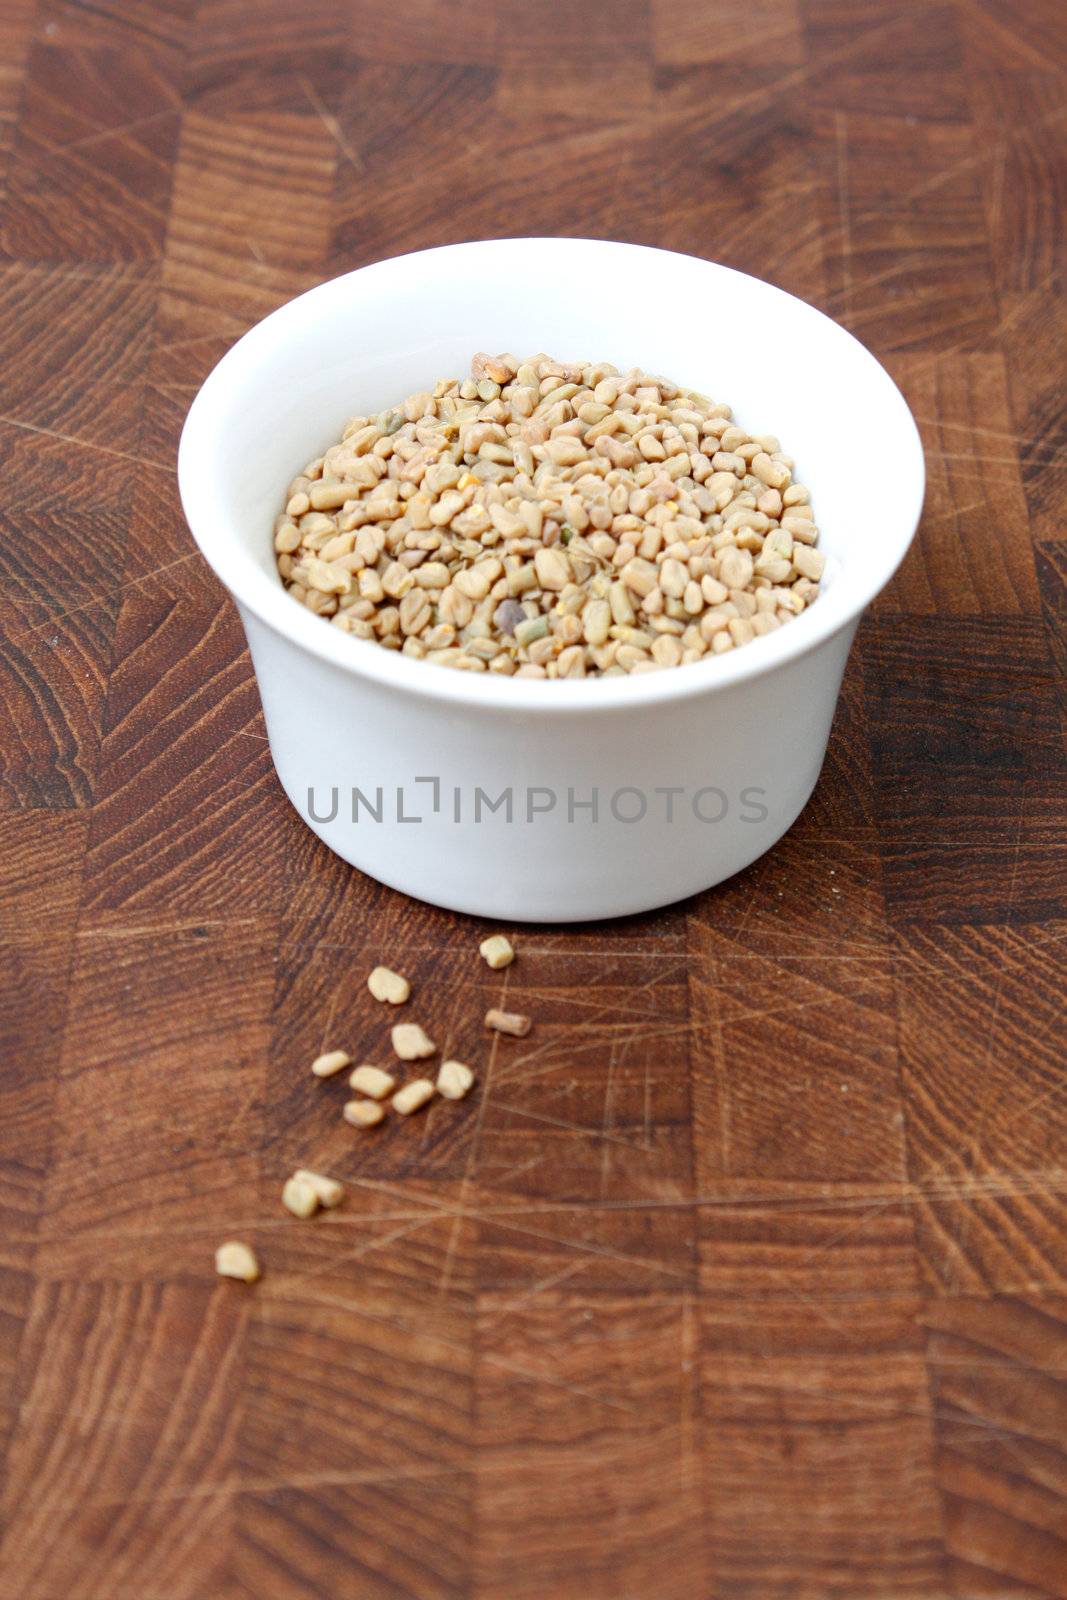 Fenugreek seeds on a brown surface